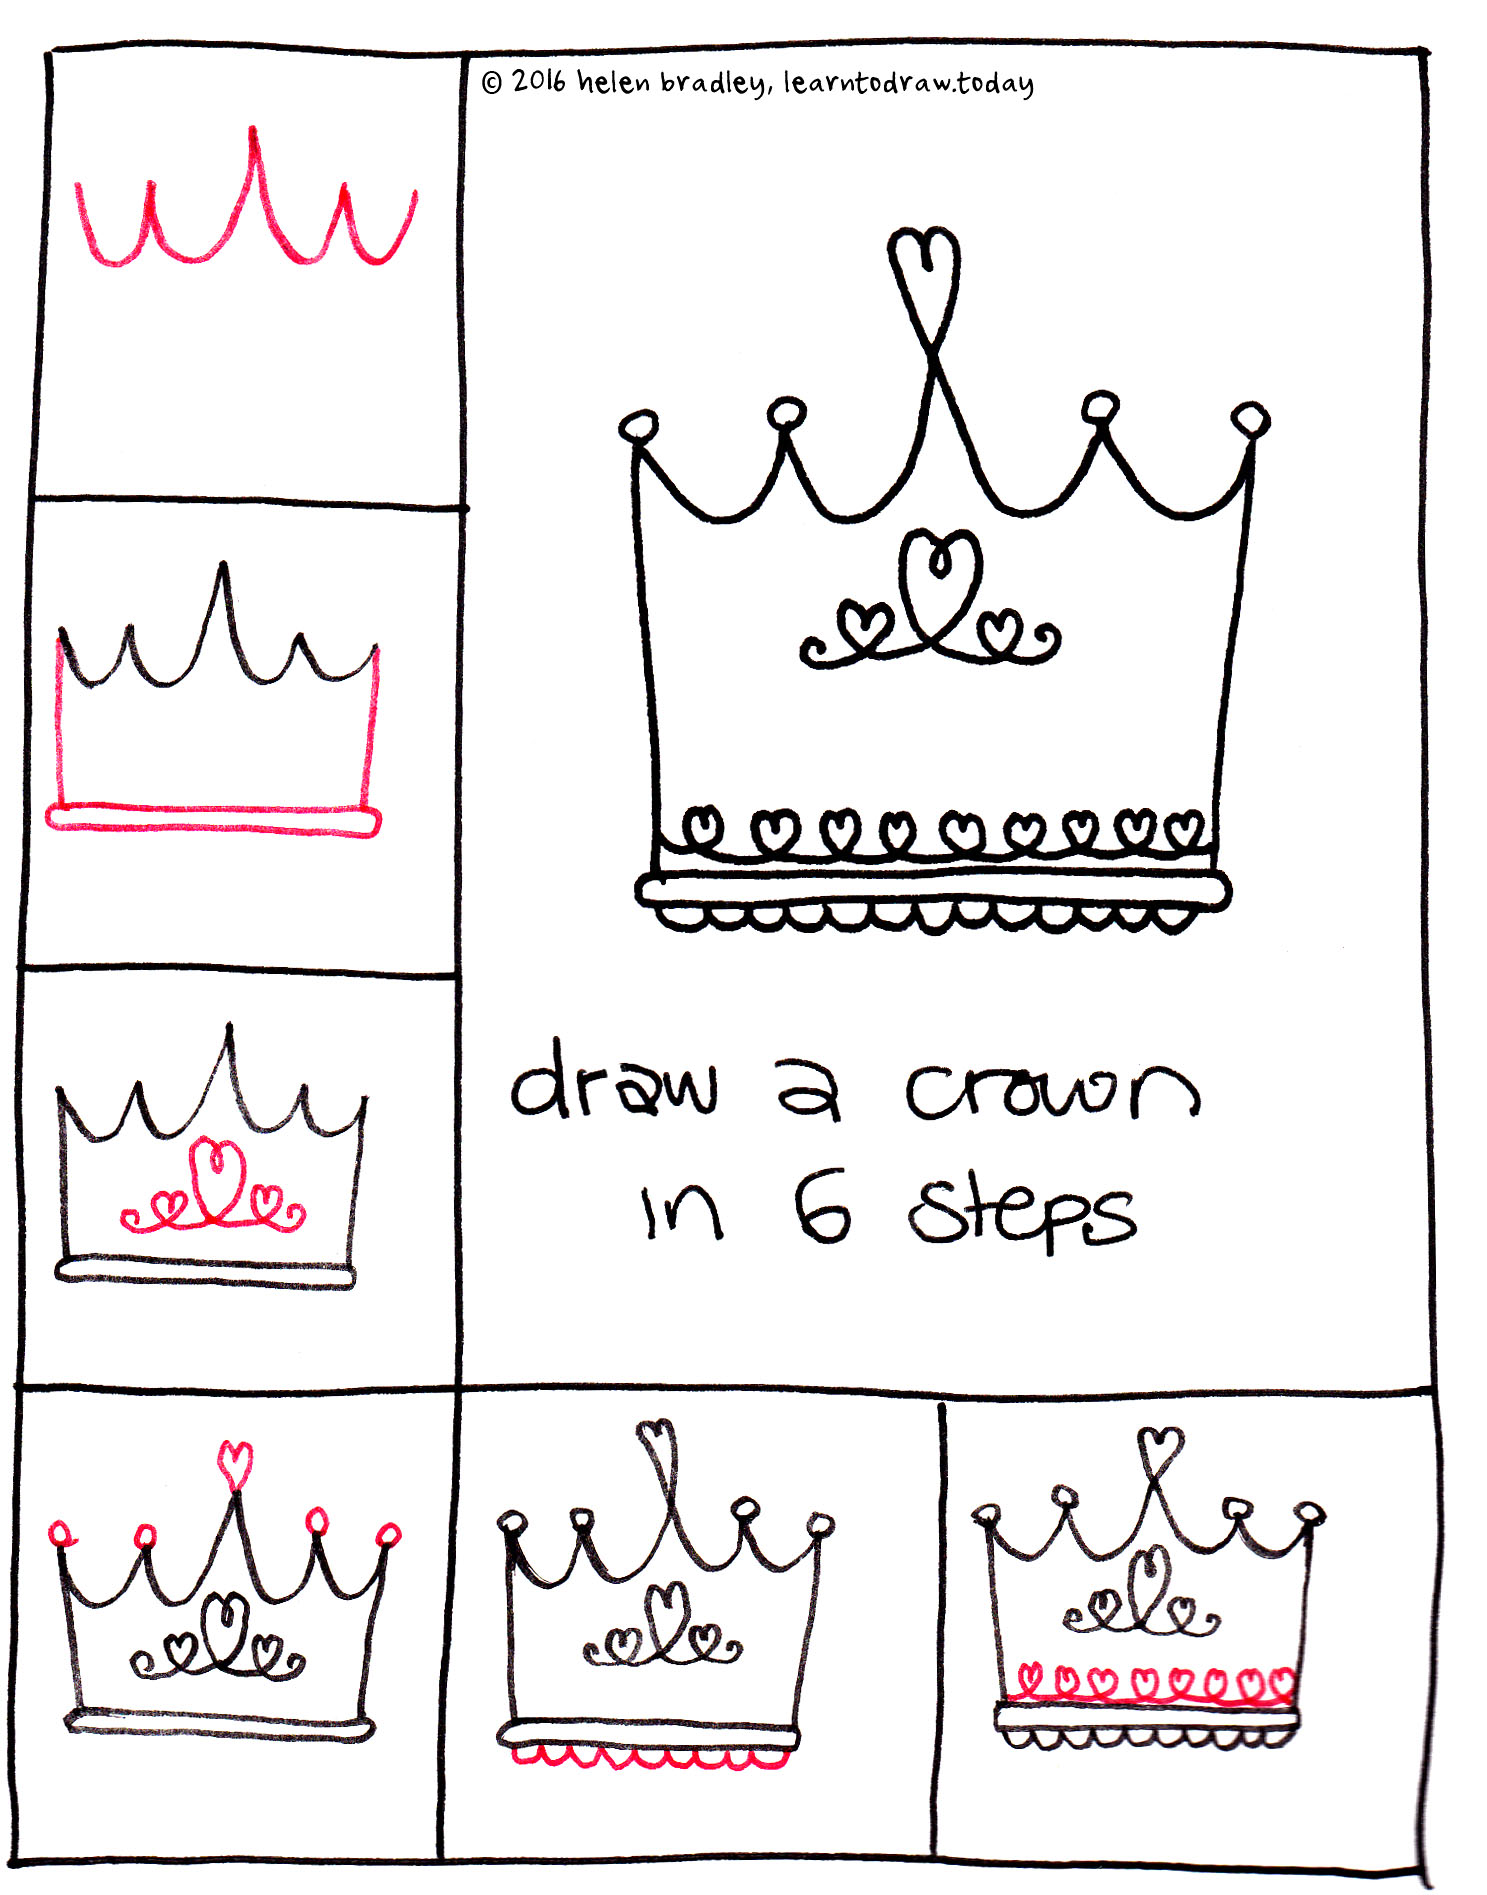 How to Draw a Crown in 6 Steps Learn To Draw